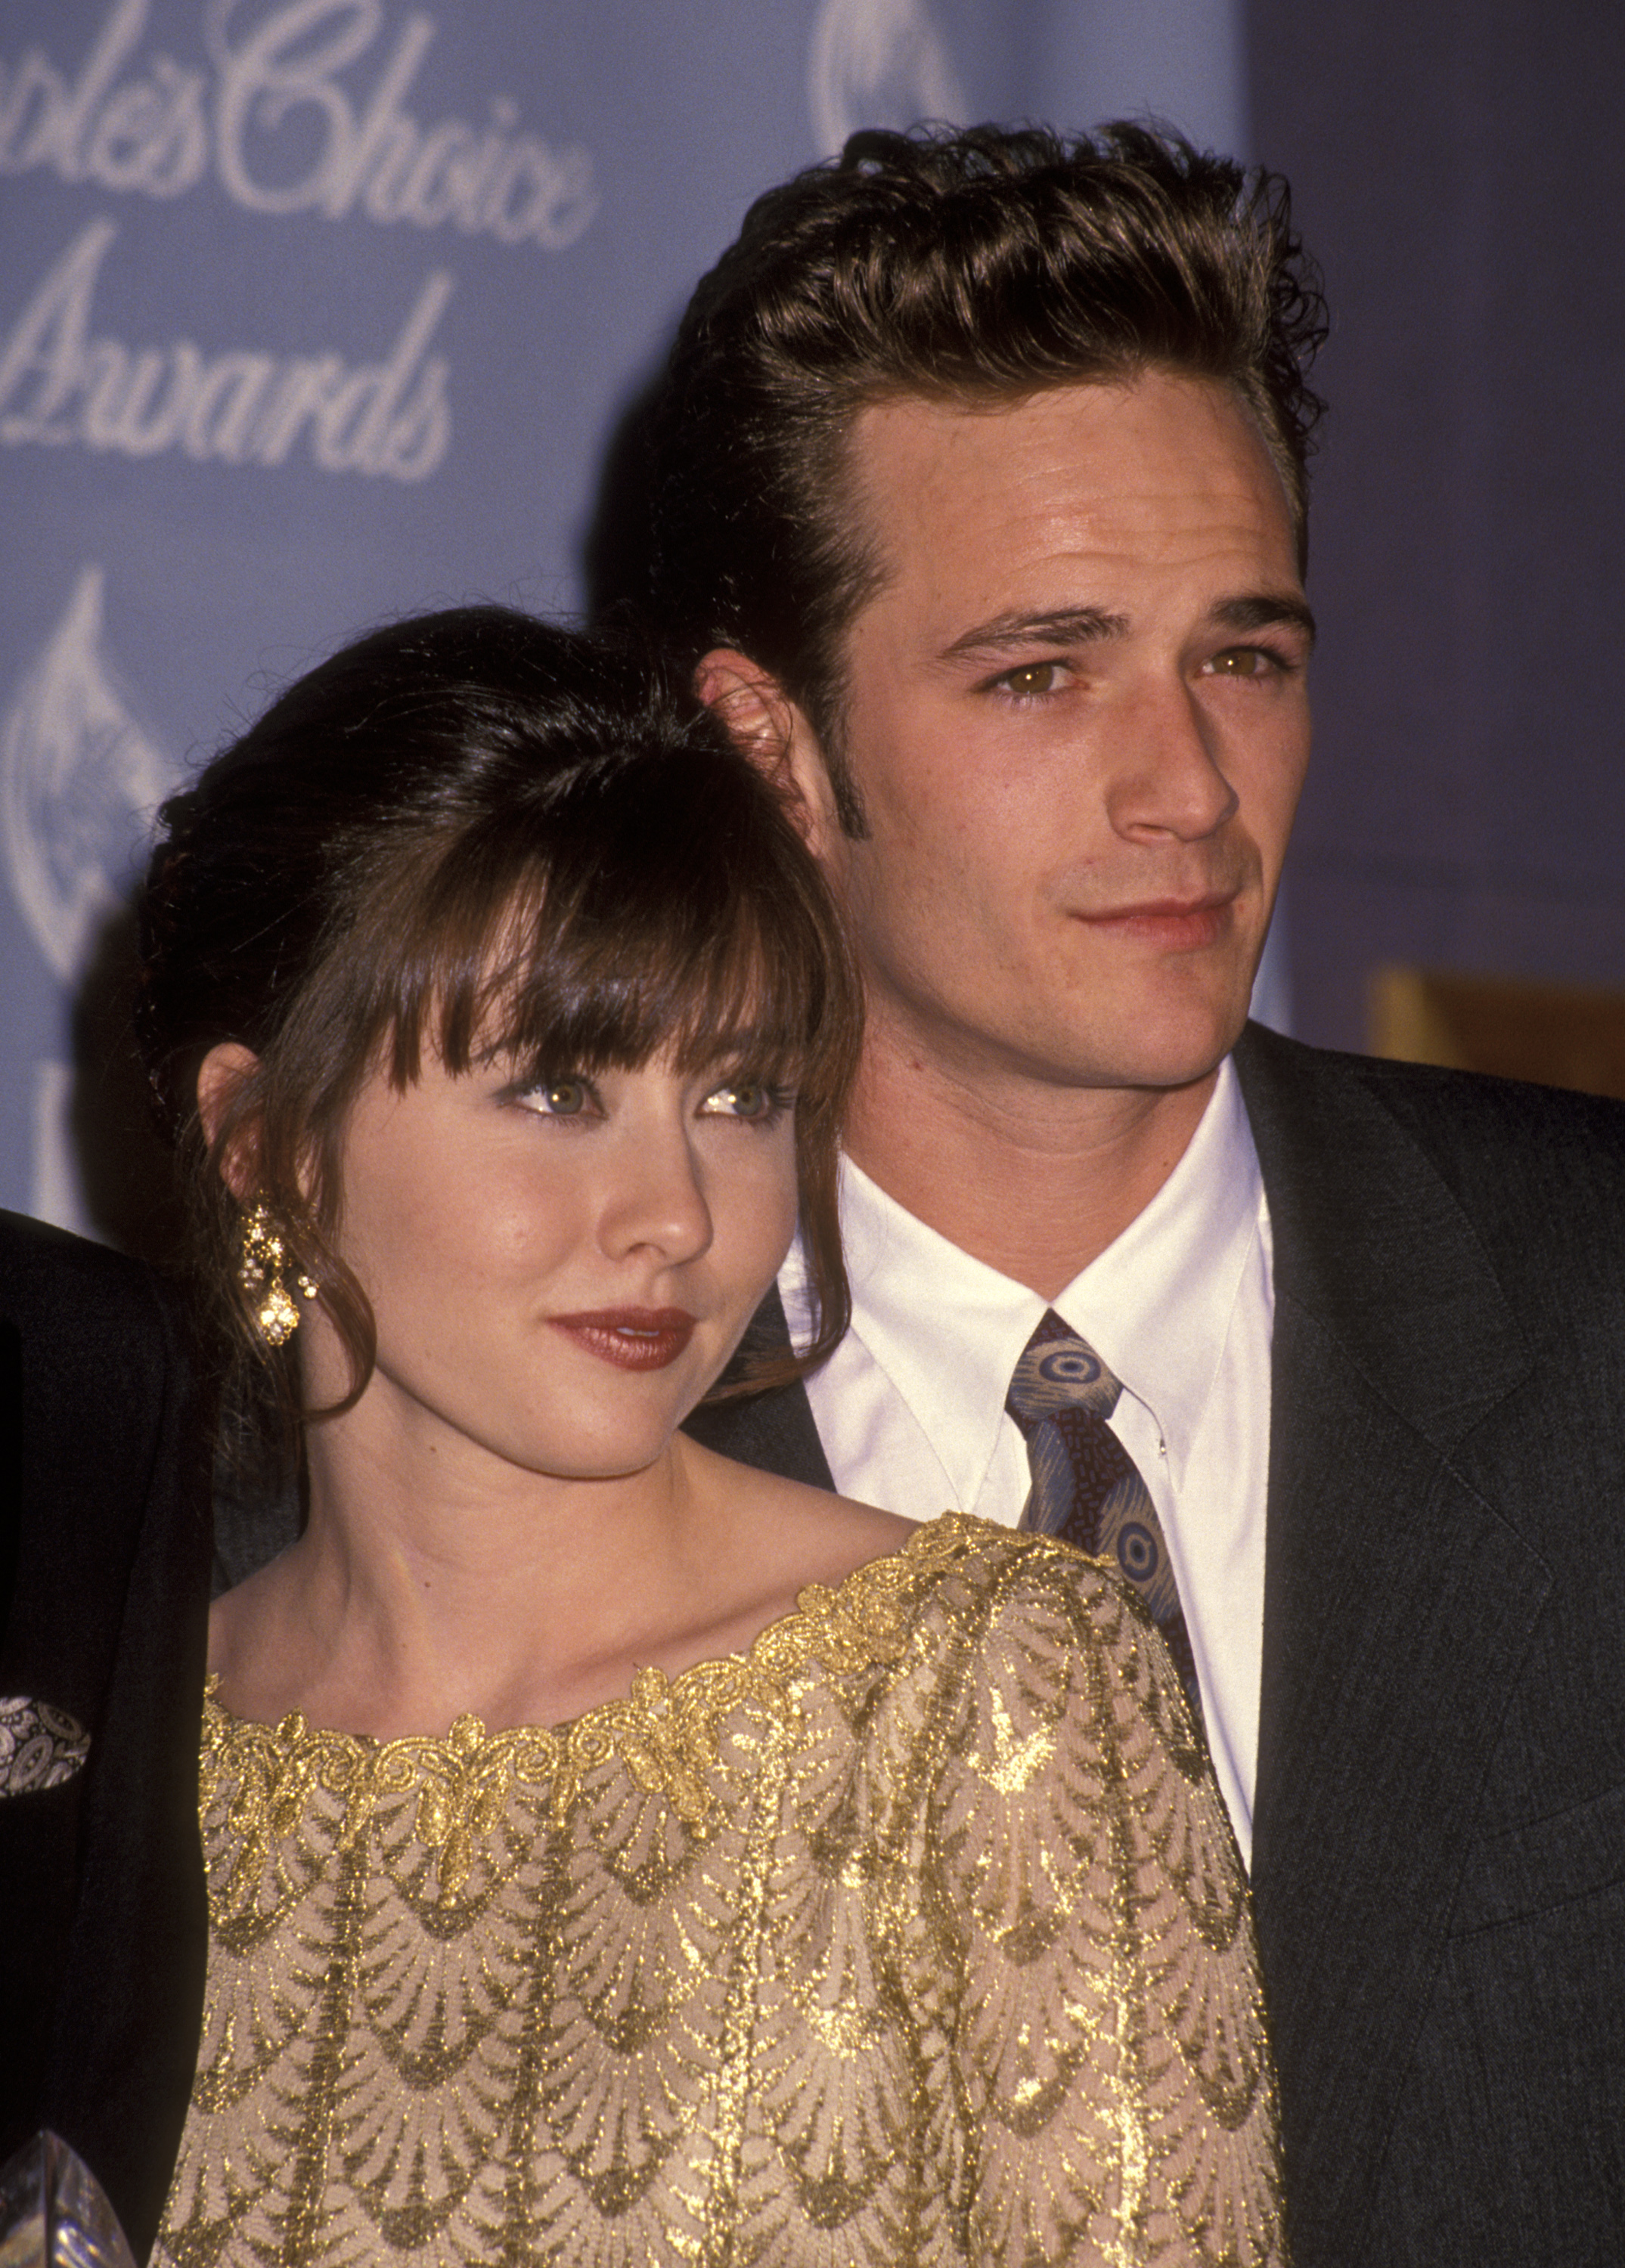 Shannen Doherty and Luke Perry at the 18th Annual People's Choice Awards in Universal City, California in 1992 | Source: Getty Images